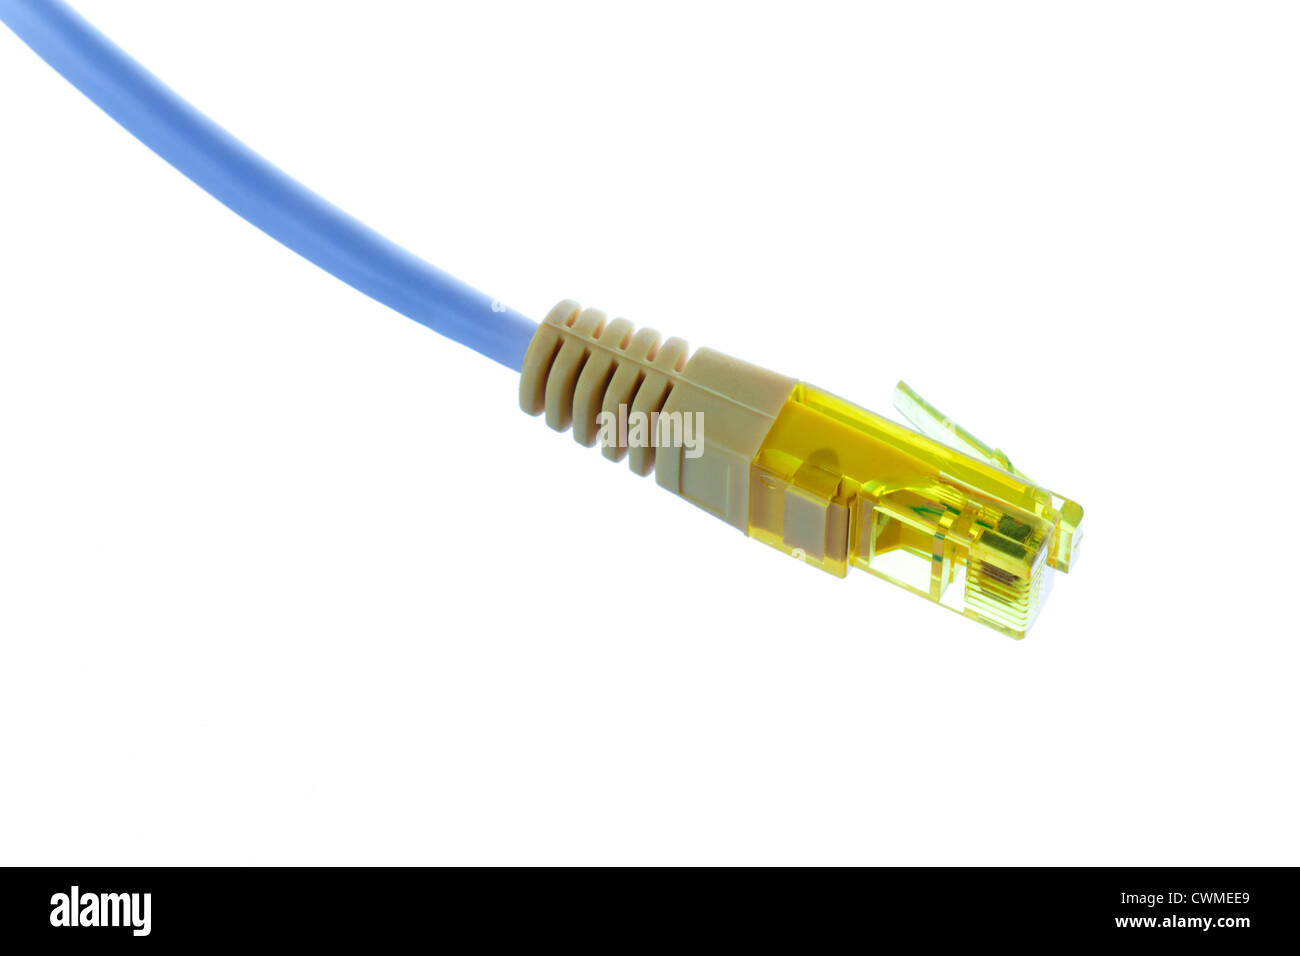 Ethernet RJ45 plug connector for Local Area Networks Stock Photo